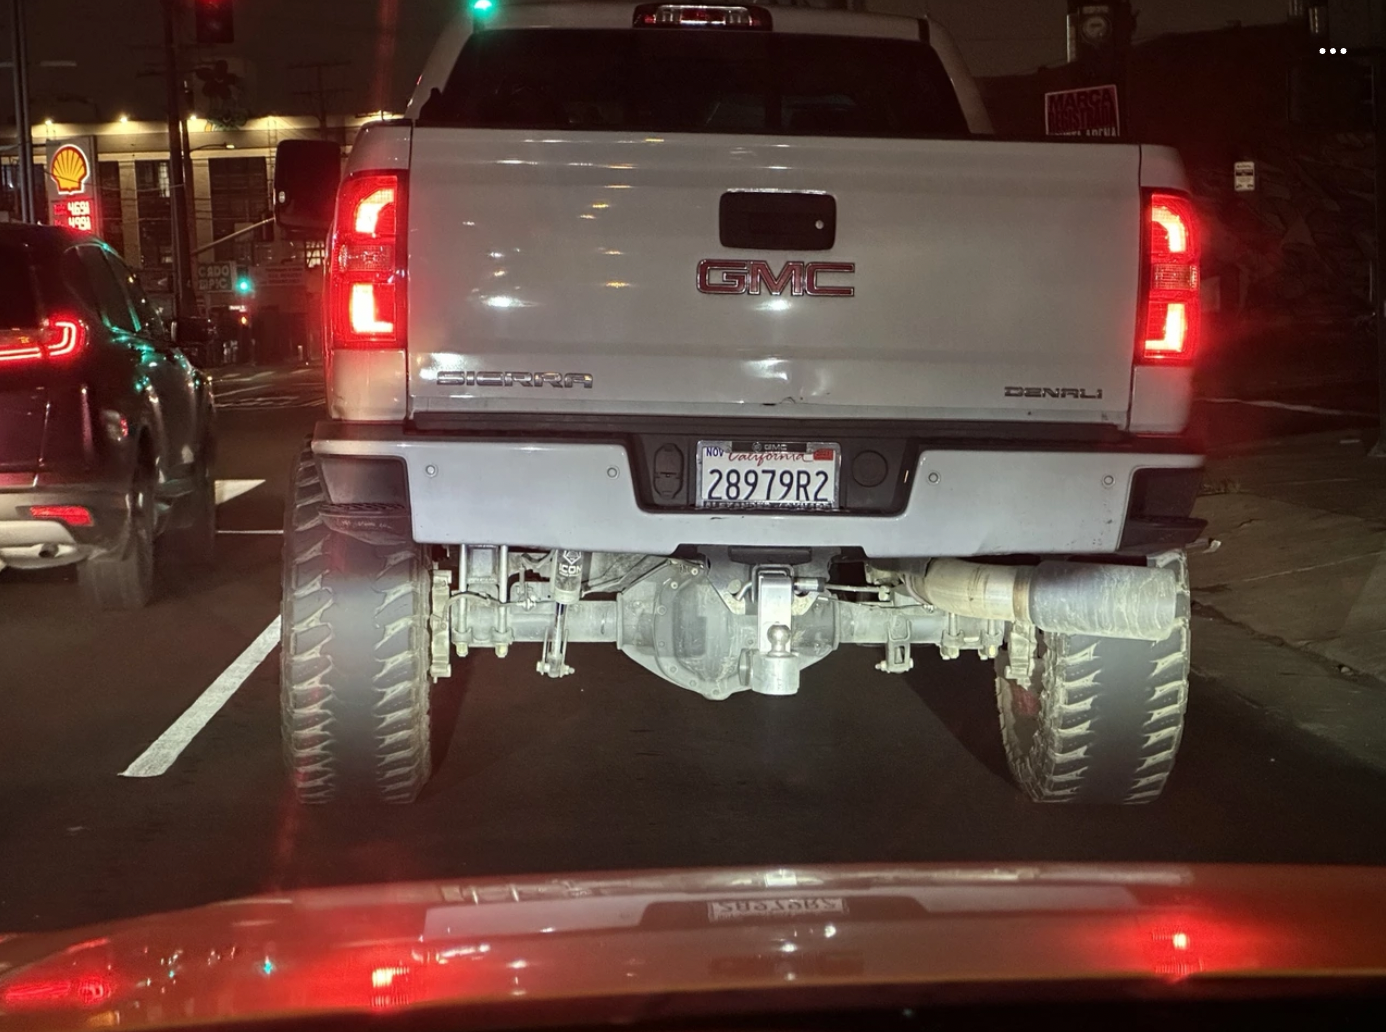 “Lifted truck with bald tires speeding and swerving through lanes.”